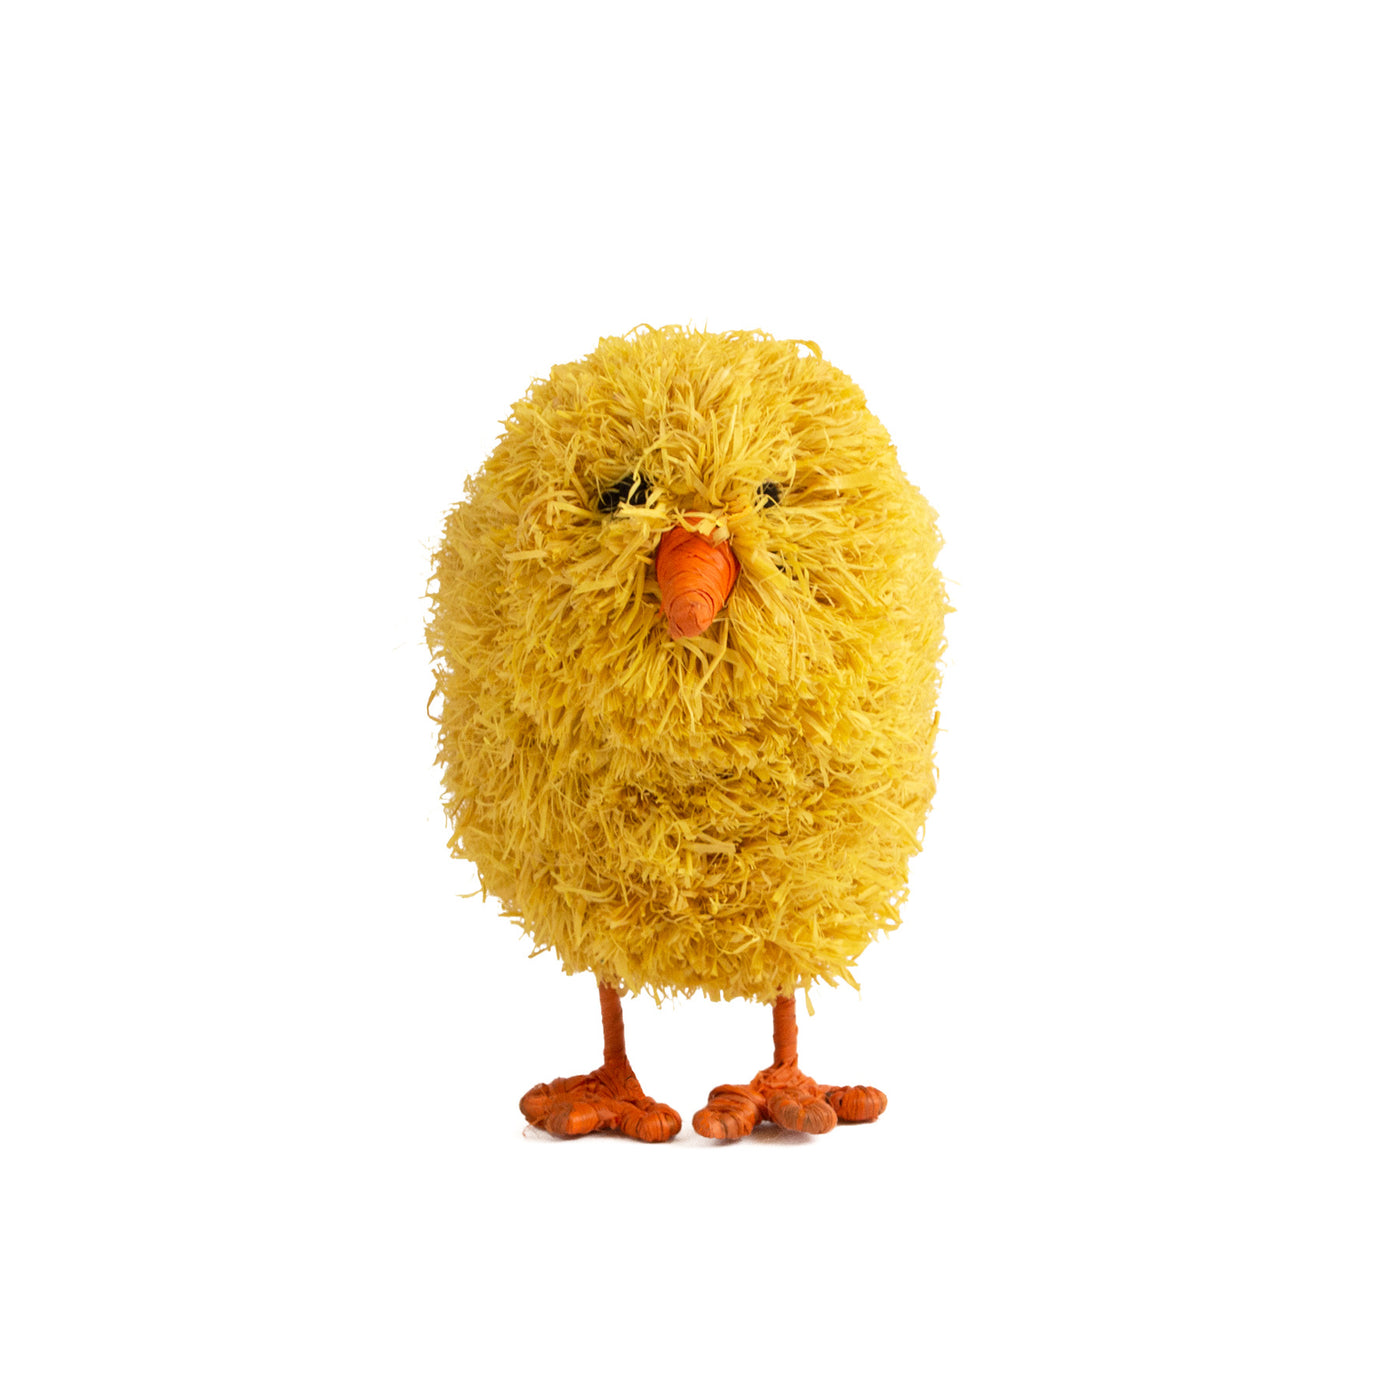 Easter Figurine - 4" Chick